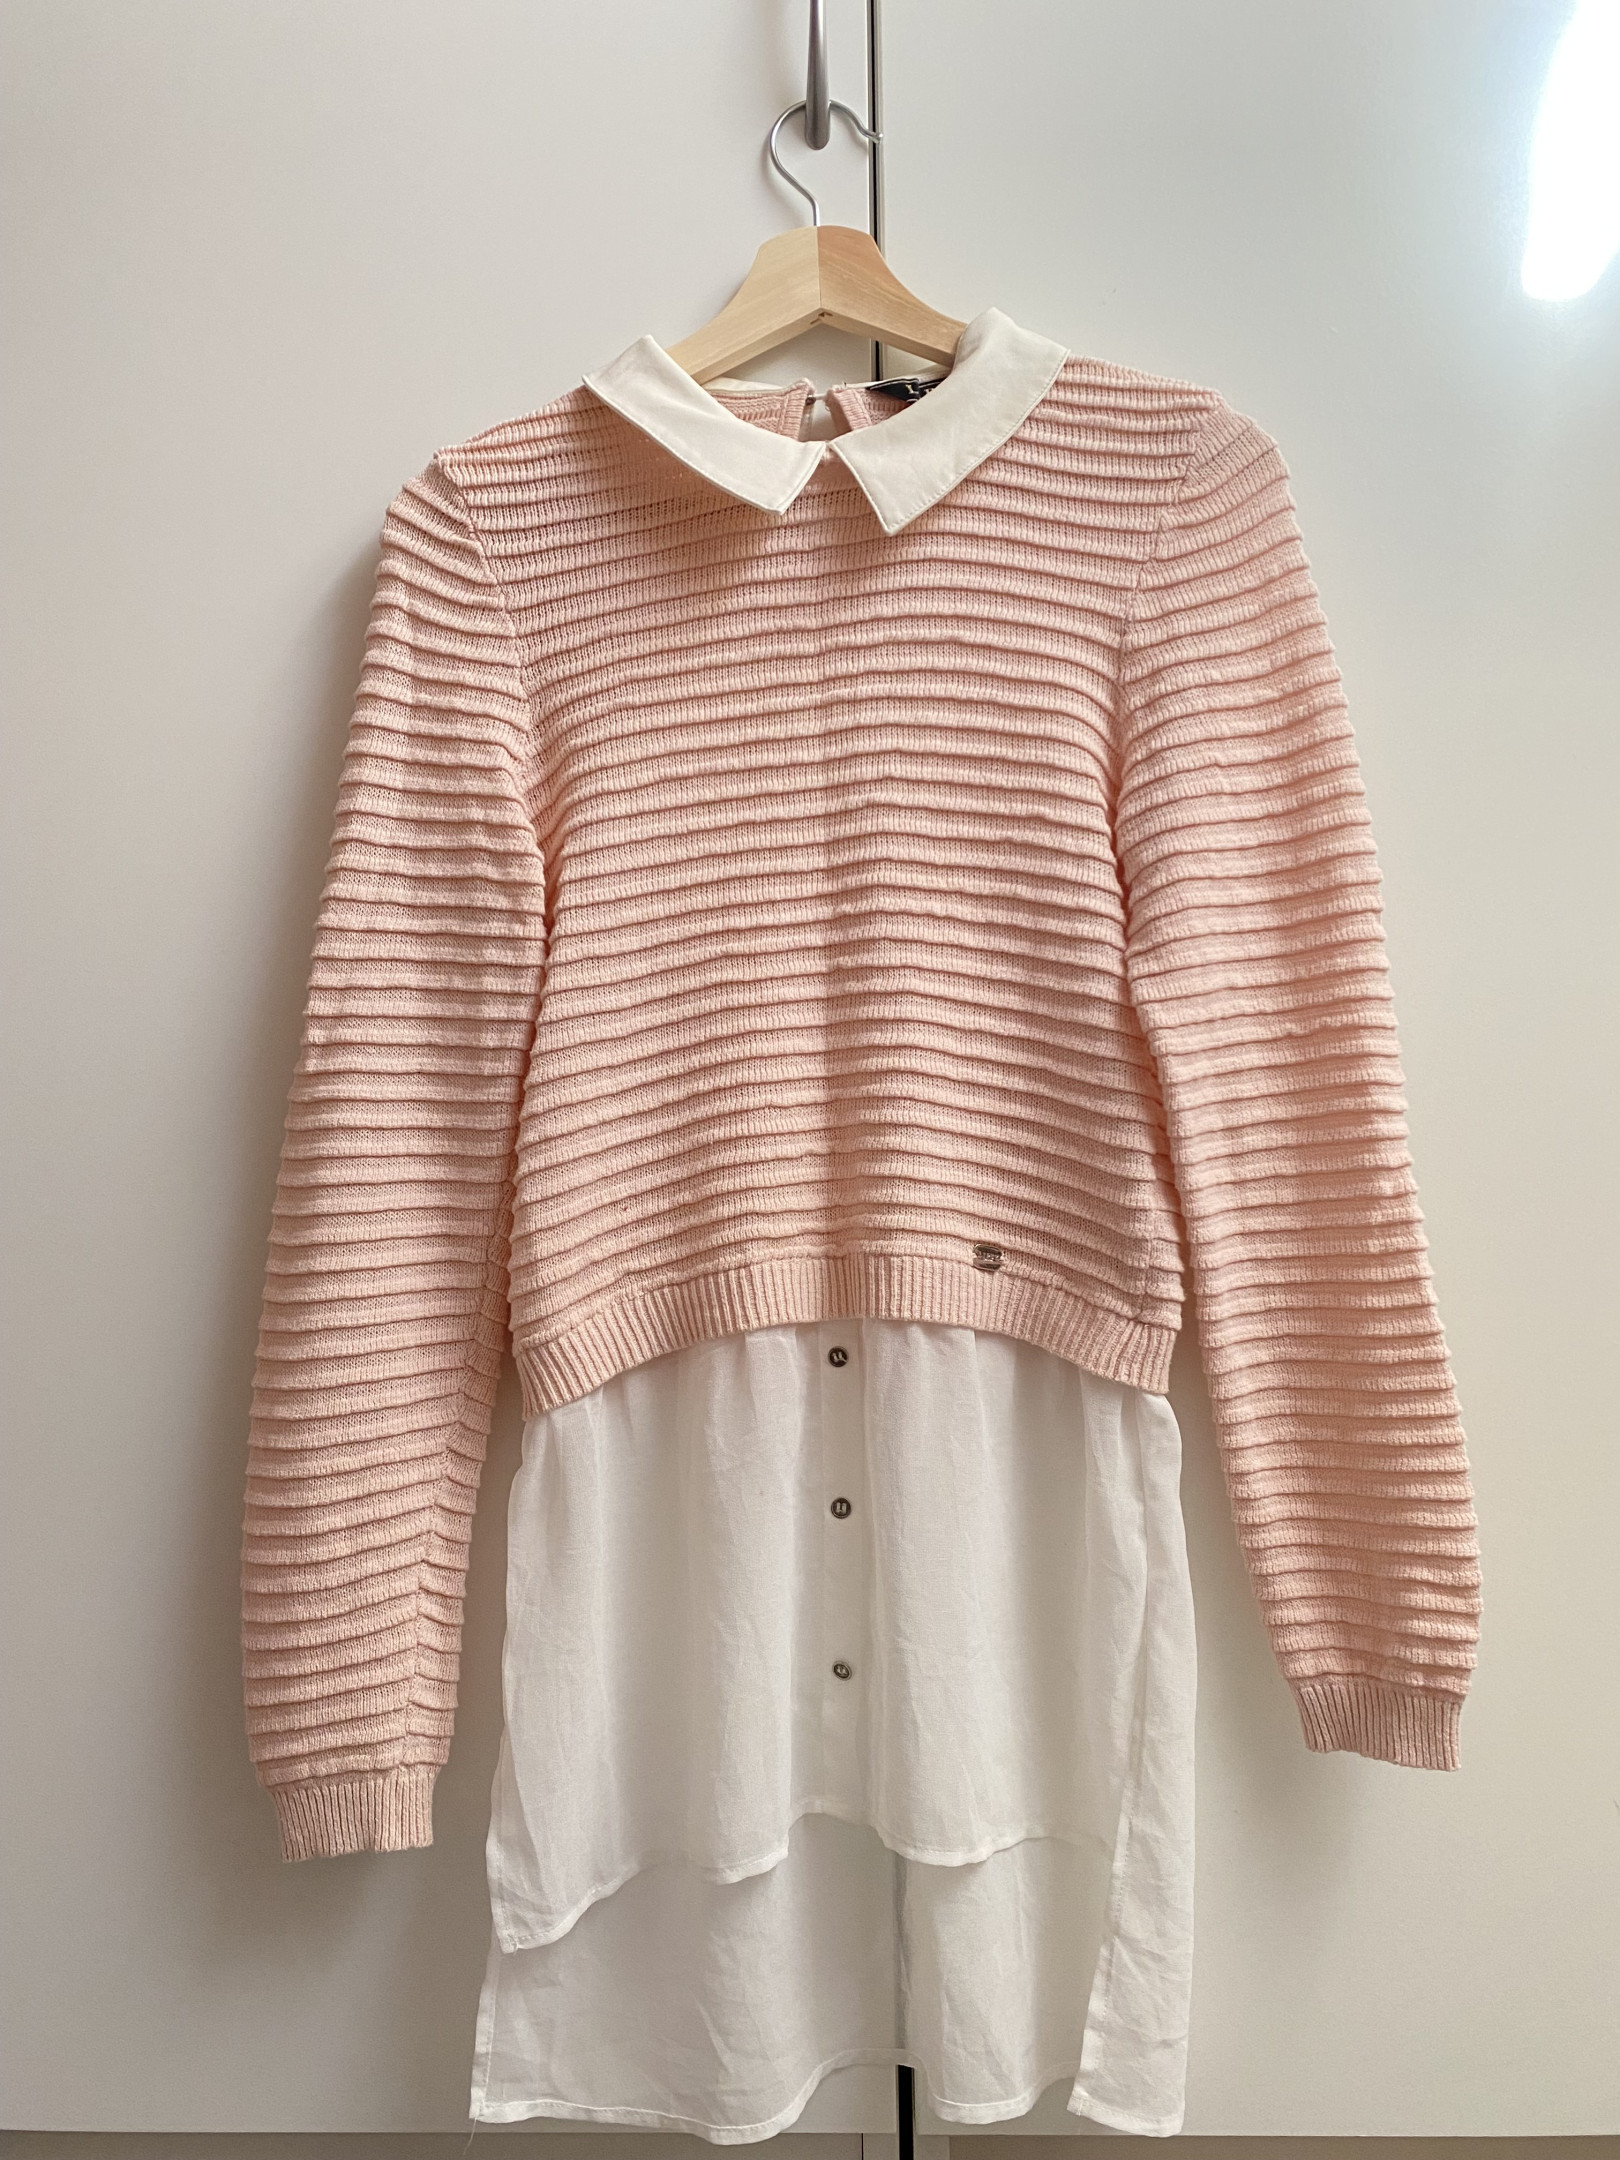 Jumper in powder pink with shirt